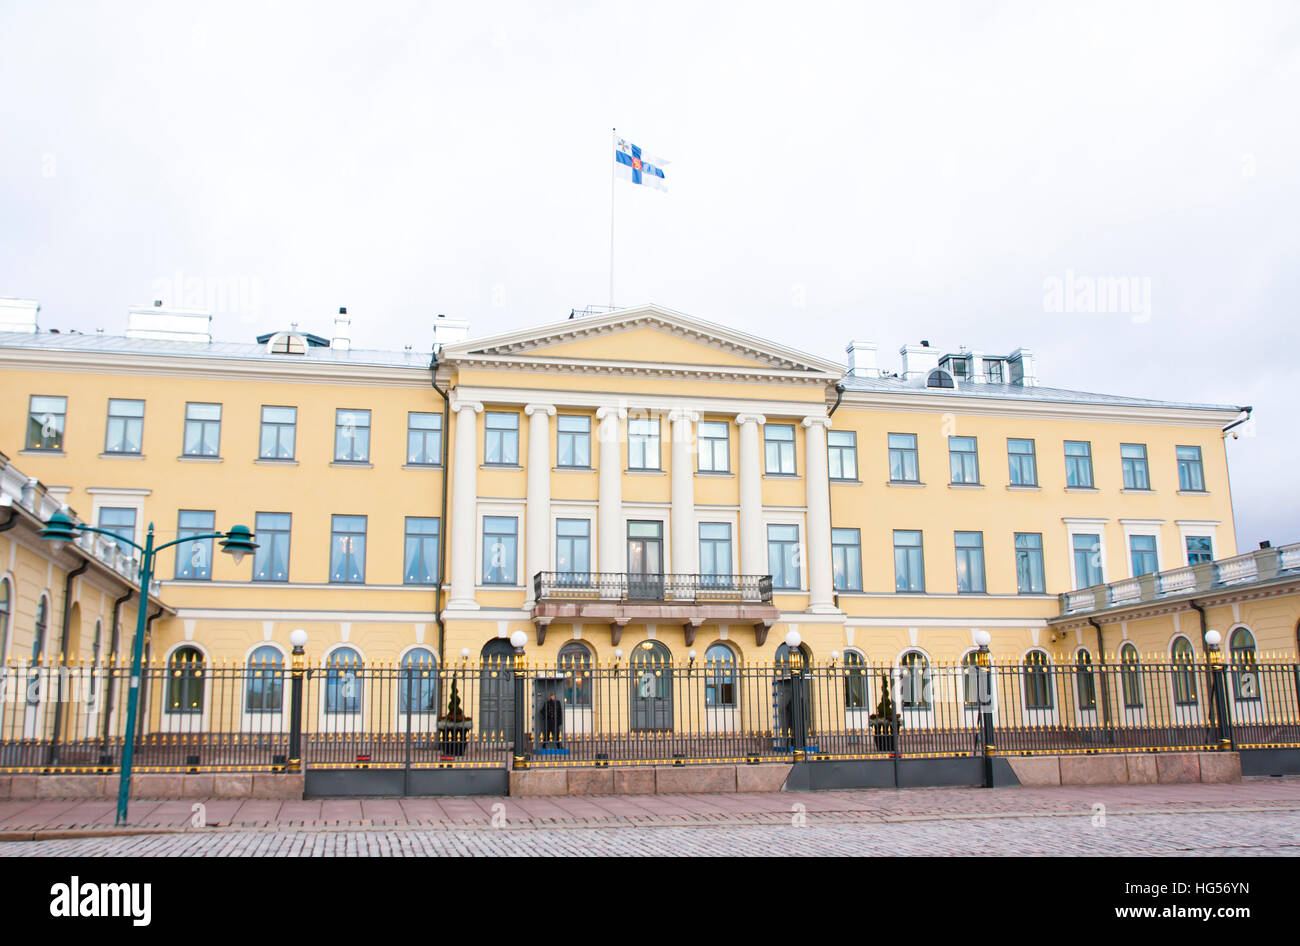 Helsinki, Finland - 21 December 2015: Building of Presidential Palace. Stock Photo